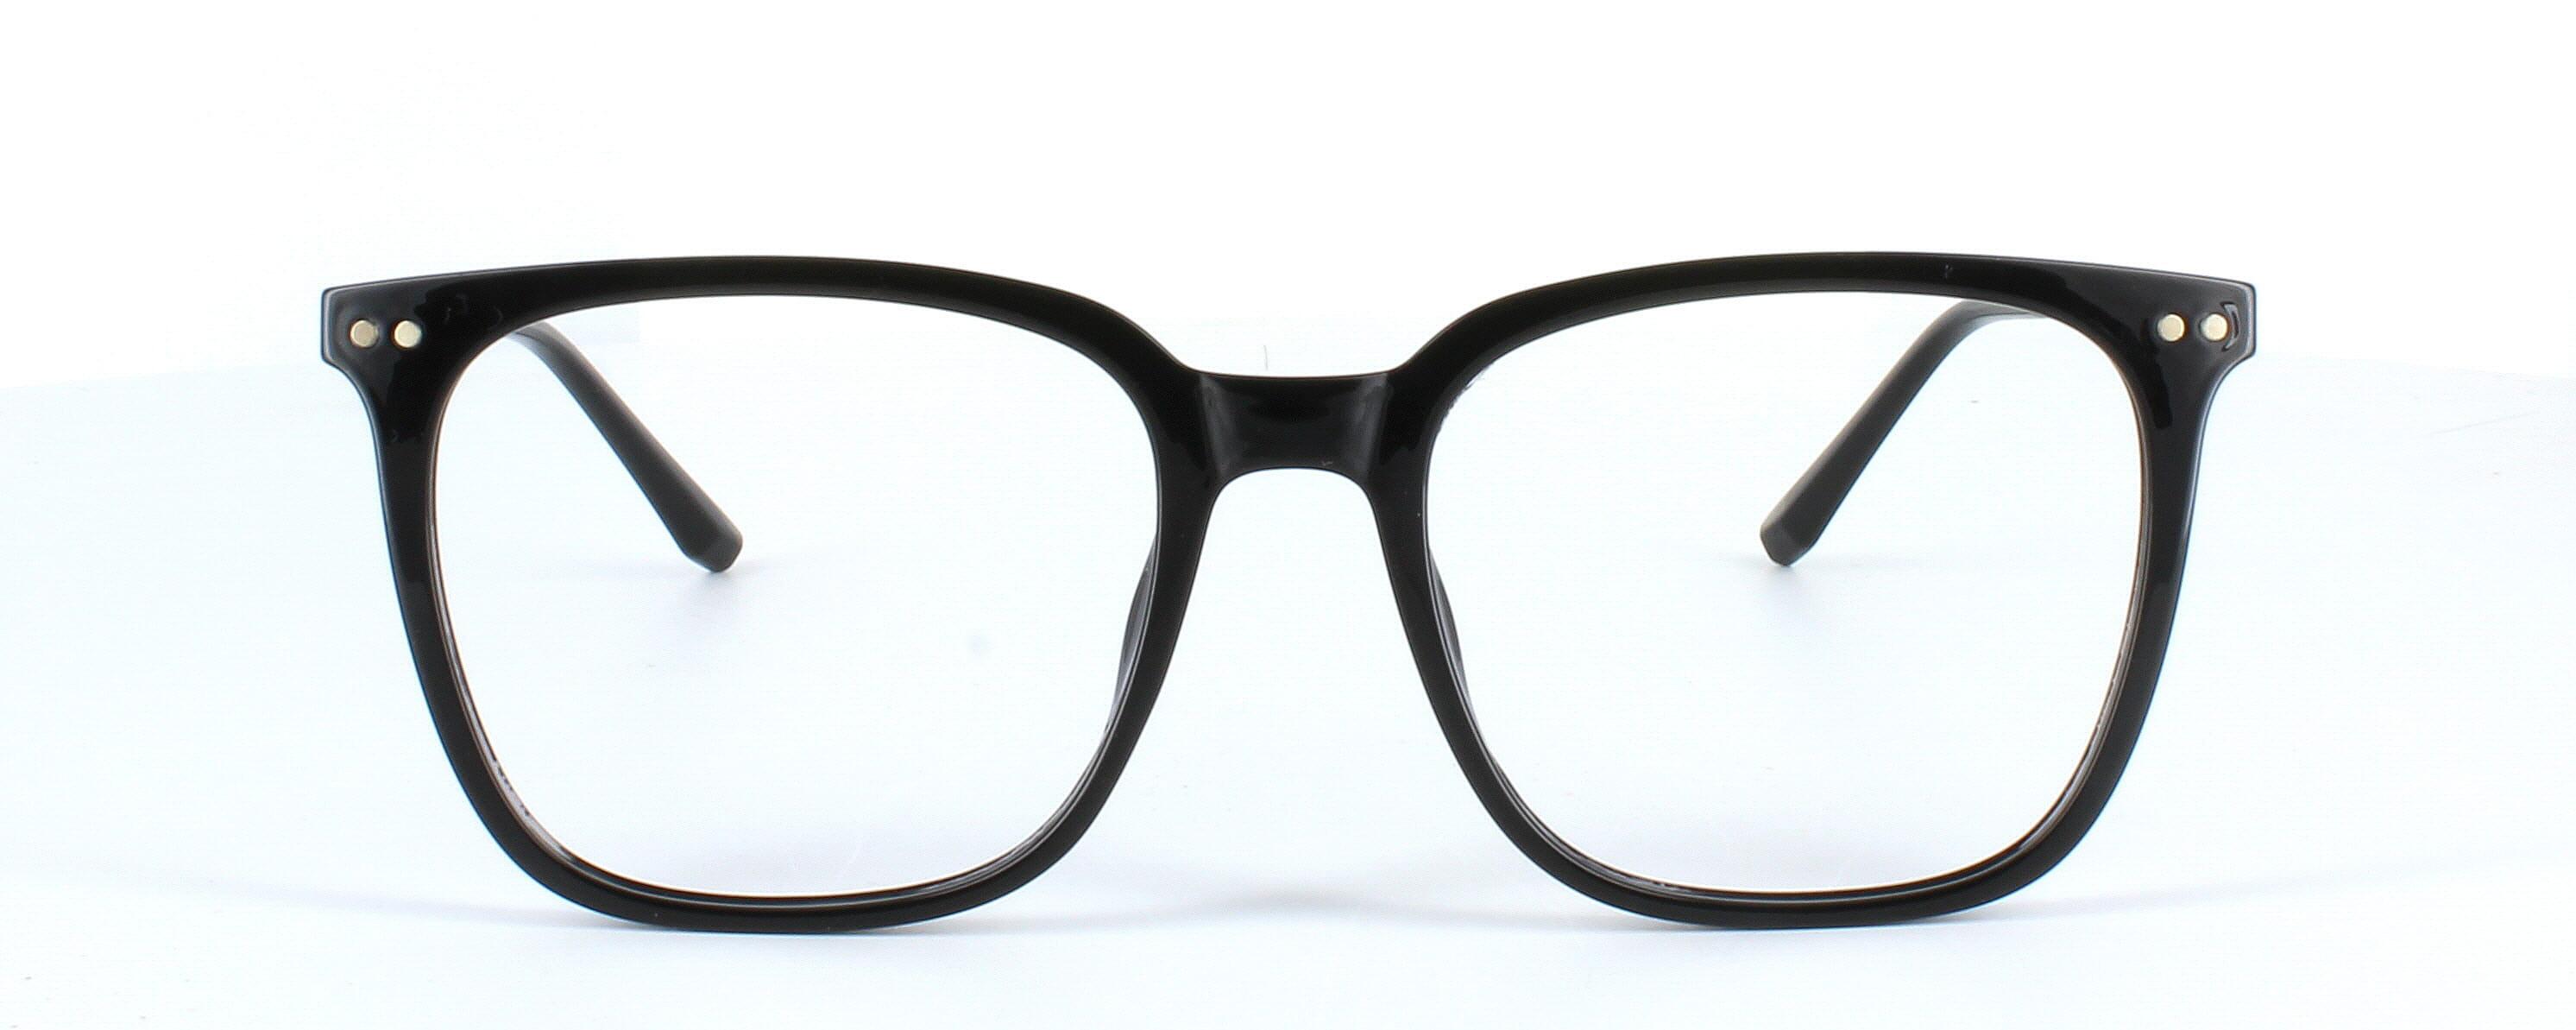 Edward Scotts ST6202 - Shiny black - Gent's acetate frame with square shaped lenses with silver titanium arms - image view 2